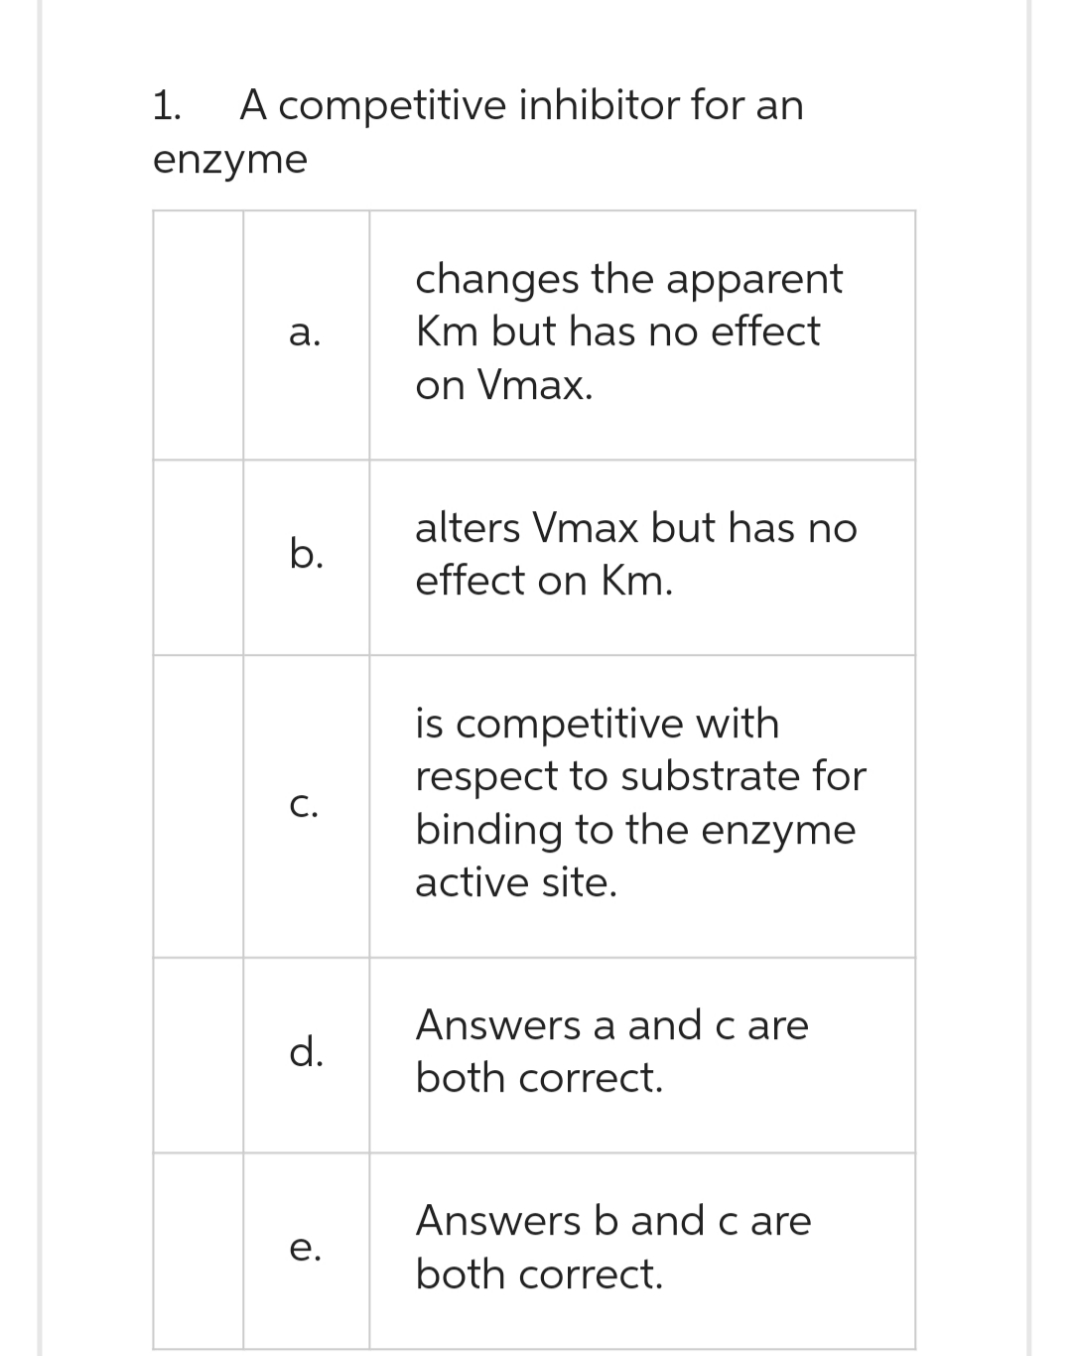 1.
A competitive inhibitor for an
enzyme
a.
b.
C.
d.
e.
changes the apparent
Km but has no effect
on Vmax.
alters Vmax but has no
effect on Km.
is competitive with
respect to substrate for
binding to the enzyme
active site.
Answers a and care
both correct.
Answers b and care
both correct.